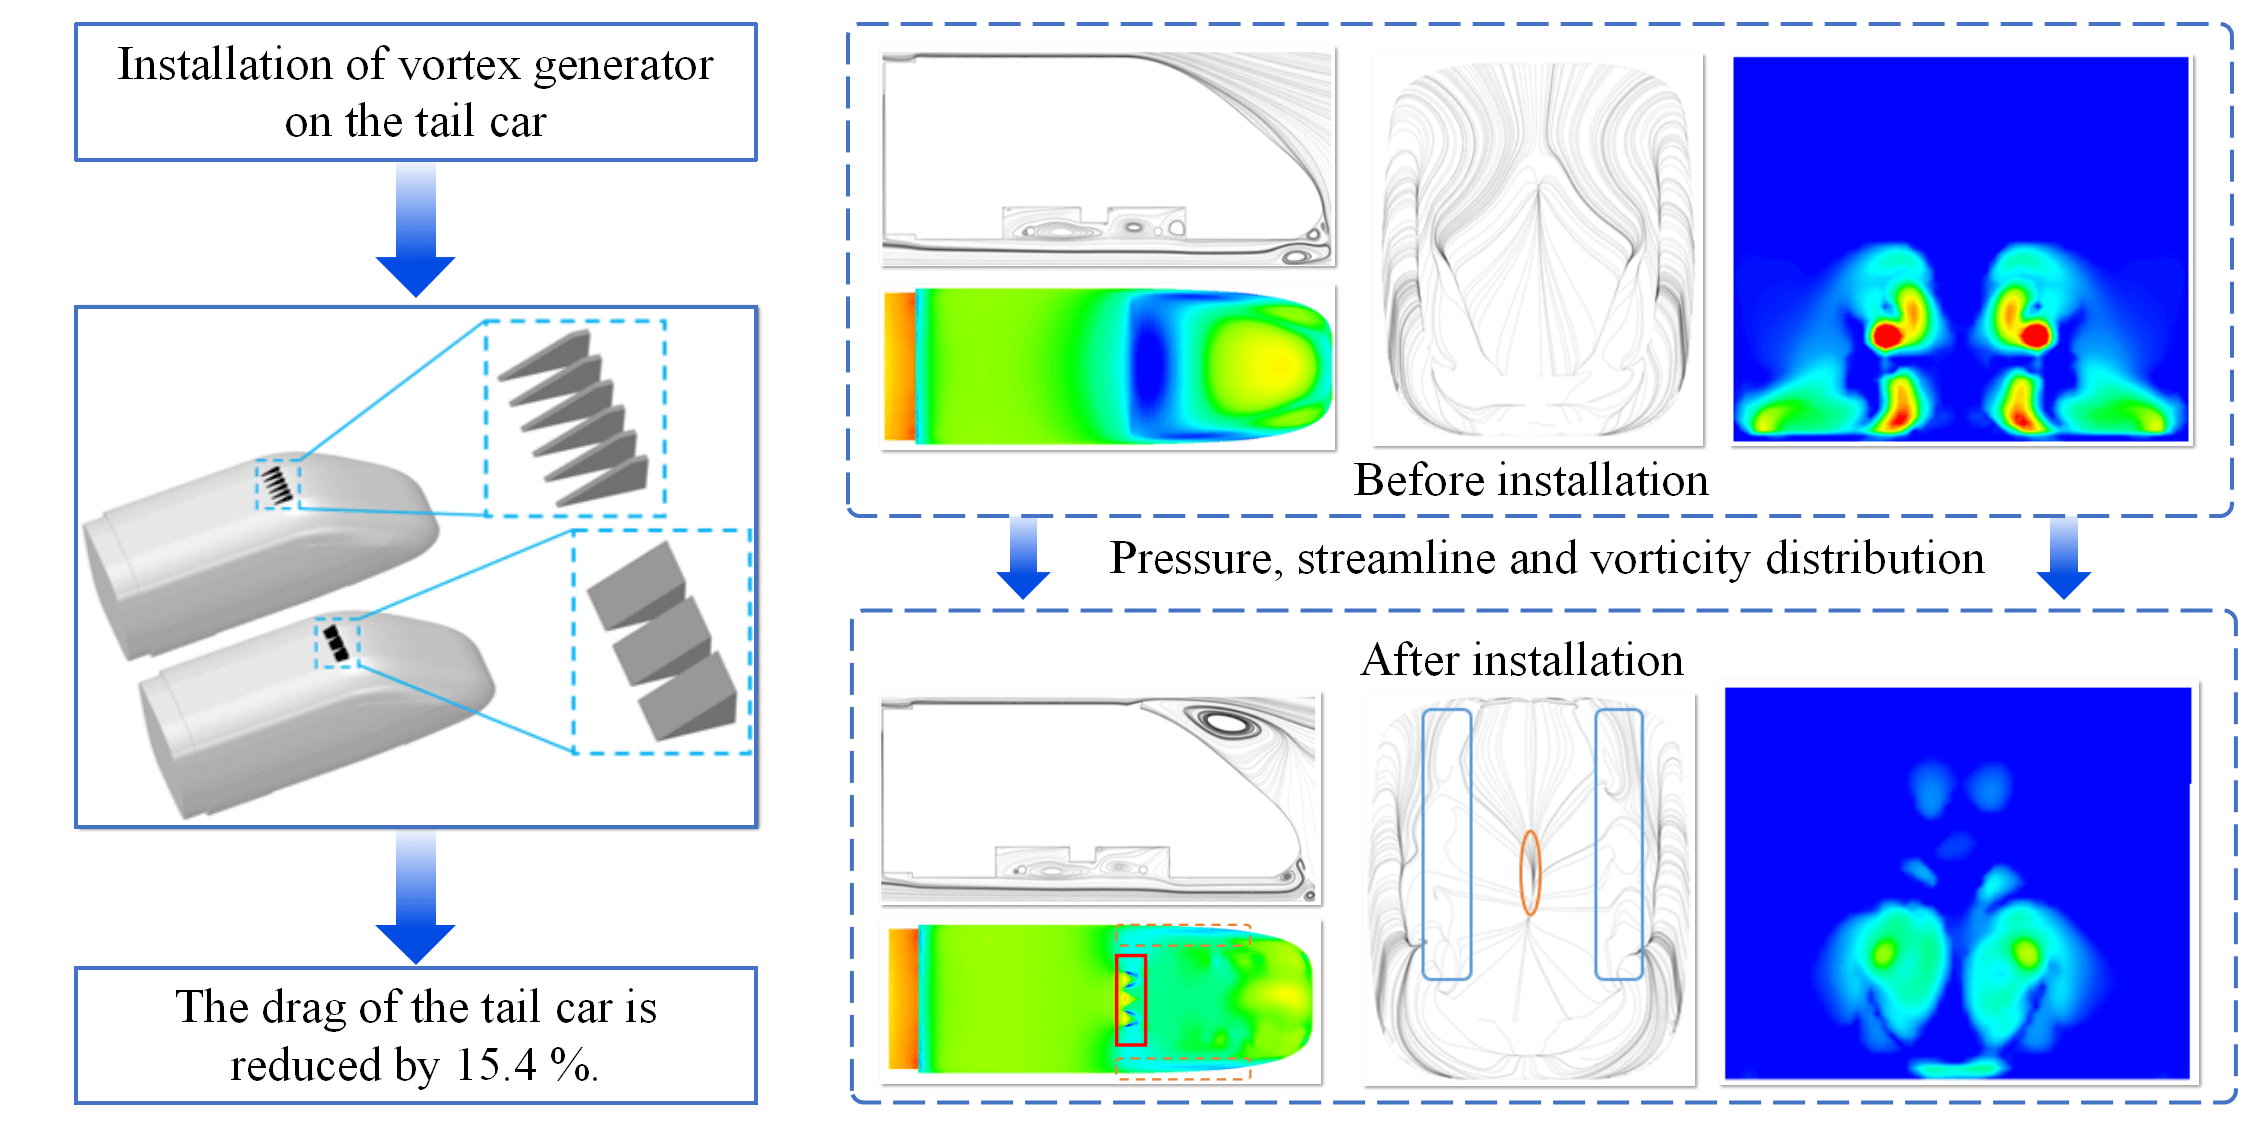 Numerical Study on the Effect of Vortex Generators on the Aerodynamic Drag of a High-Speed Train